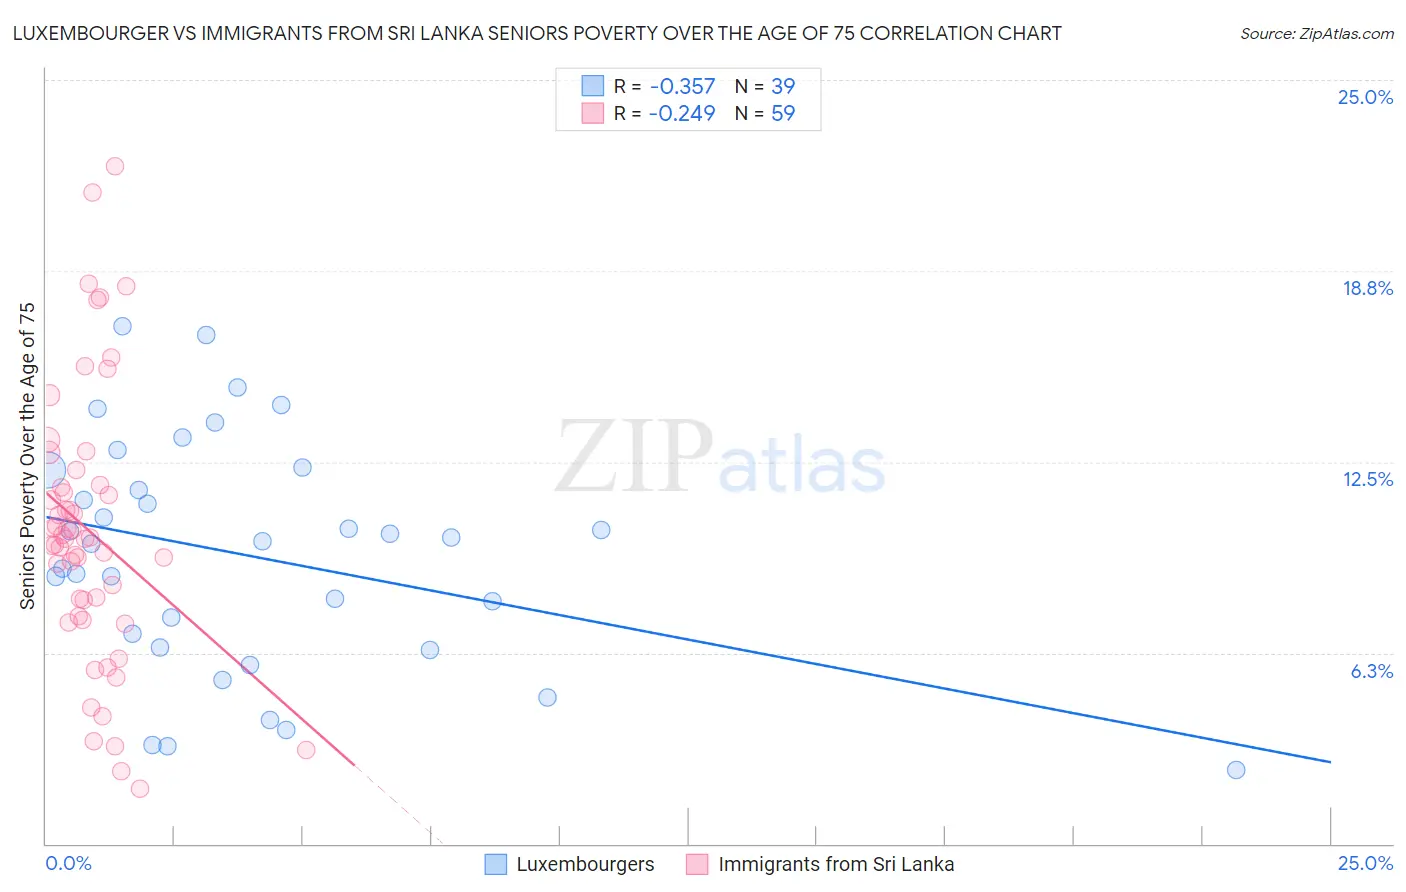 Luxembourger vs Immigrants from Sri Lanka Seniors Poverty Over the Age of 75